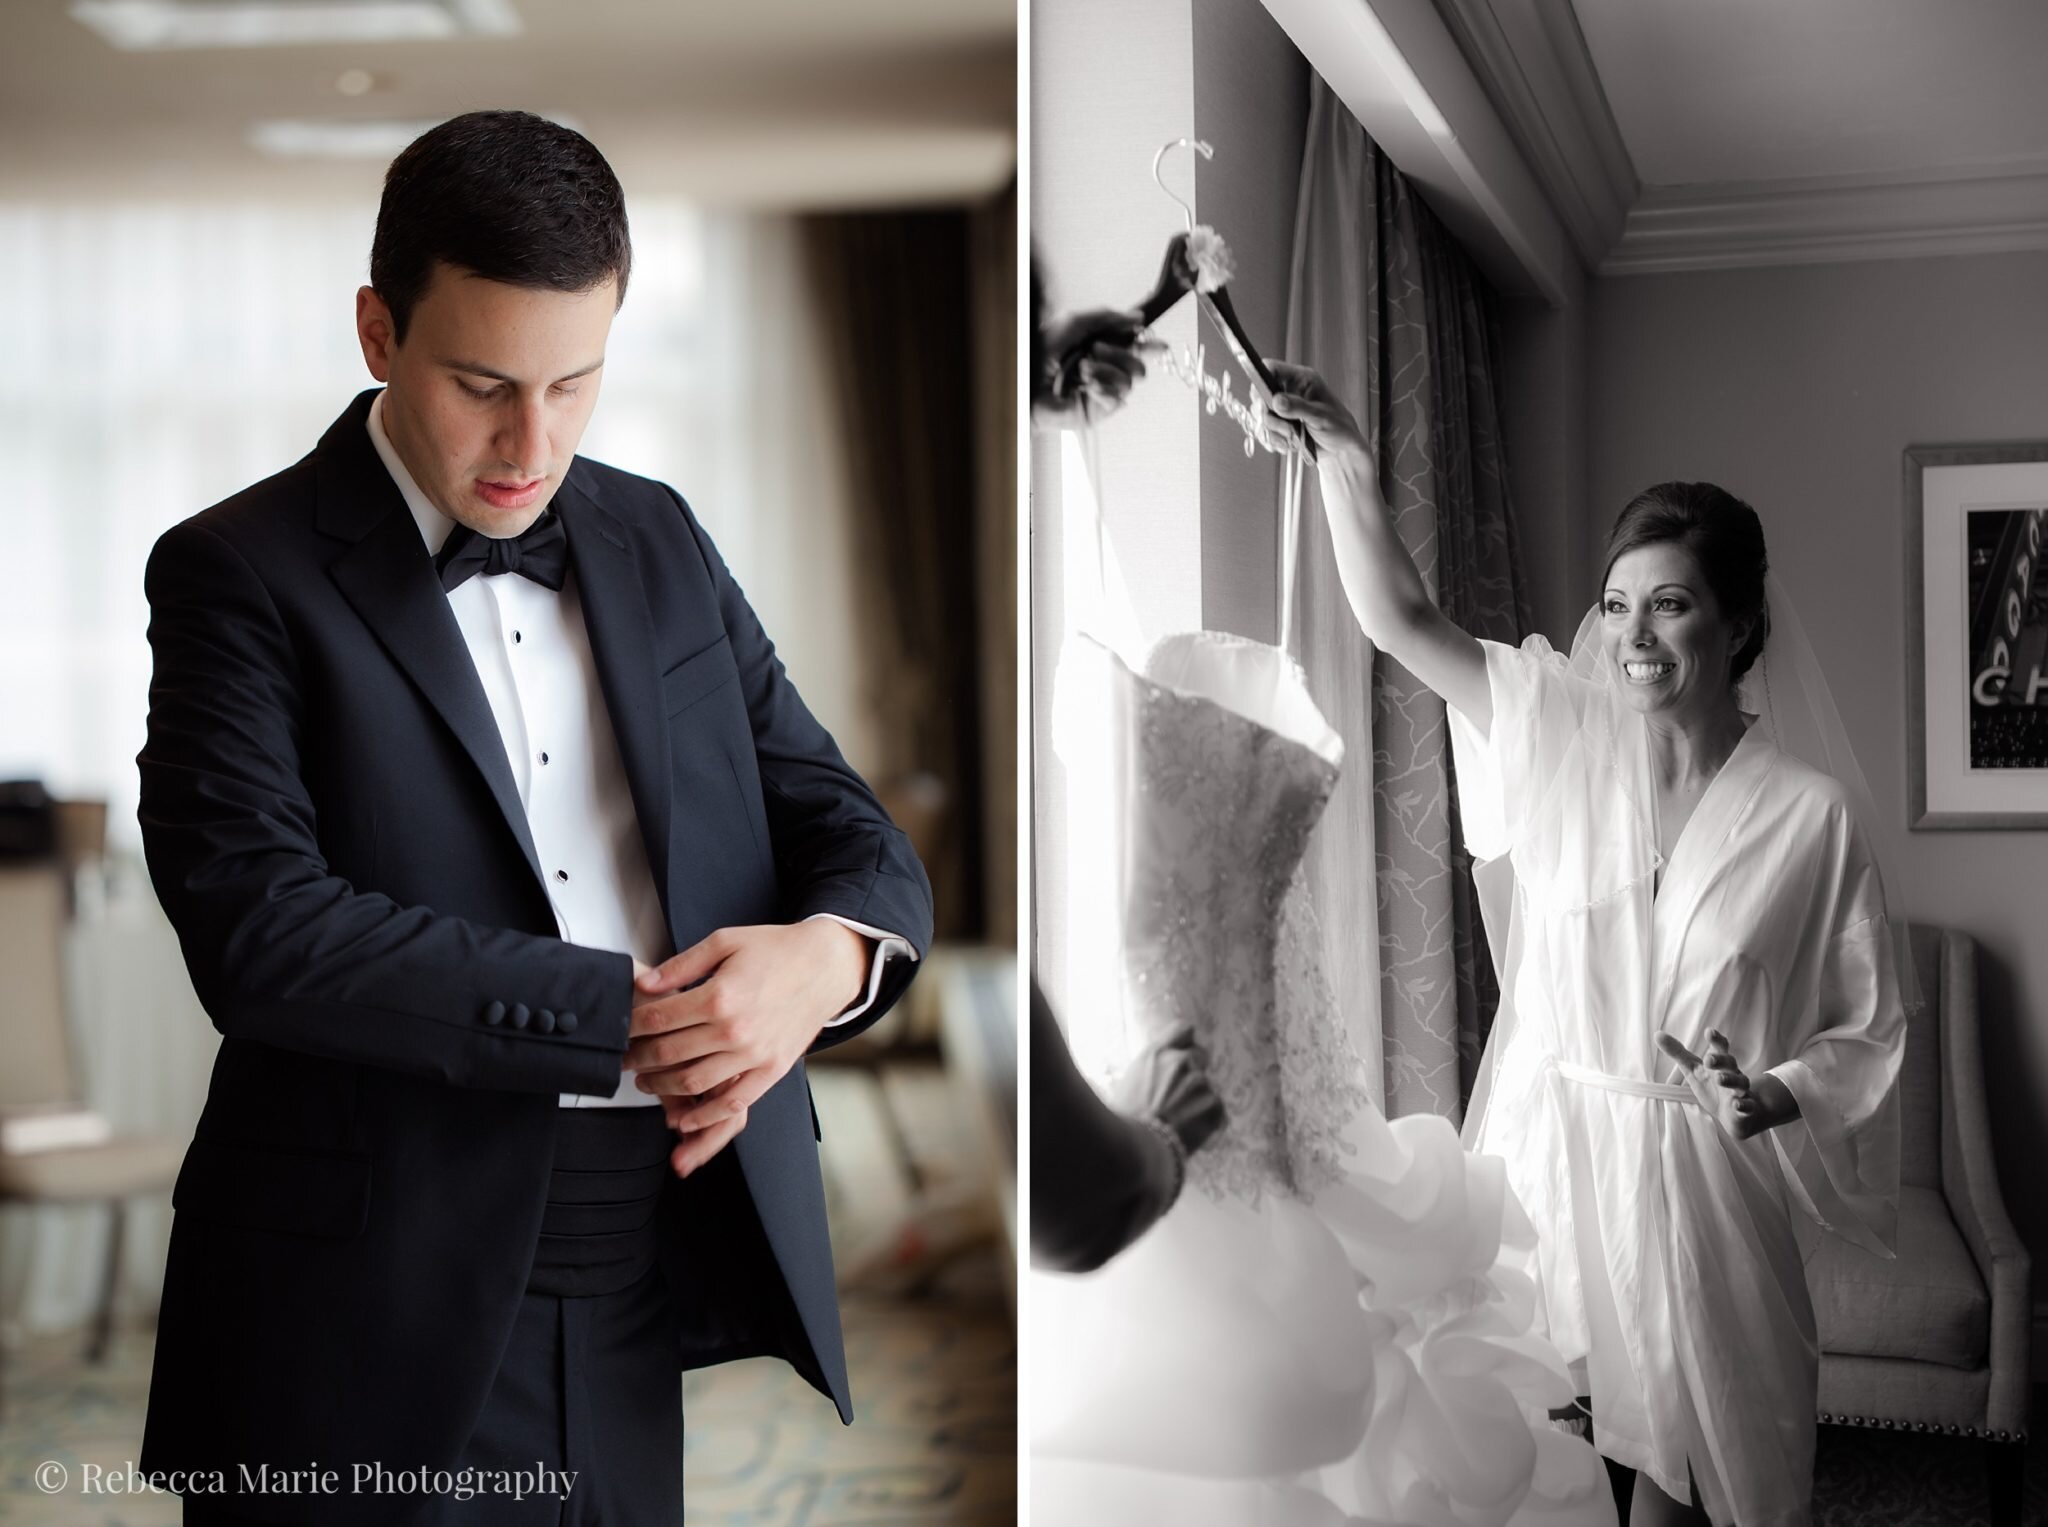 Tips-for-Gorgeous-Wedding-Day-Photos-Rebecca-Marie-Photography20150808-0005